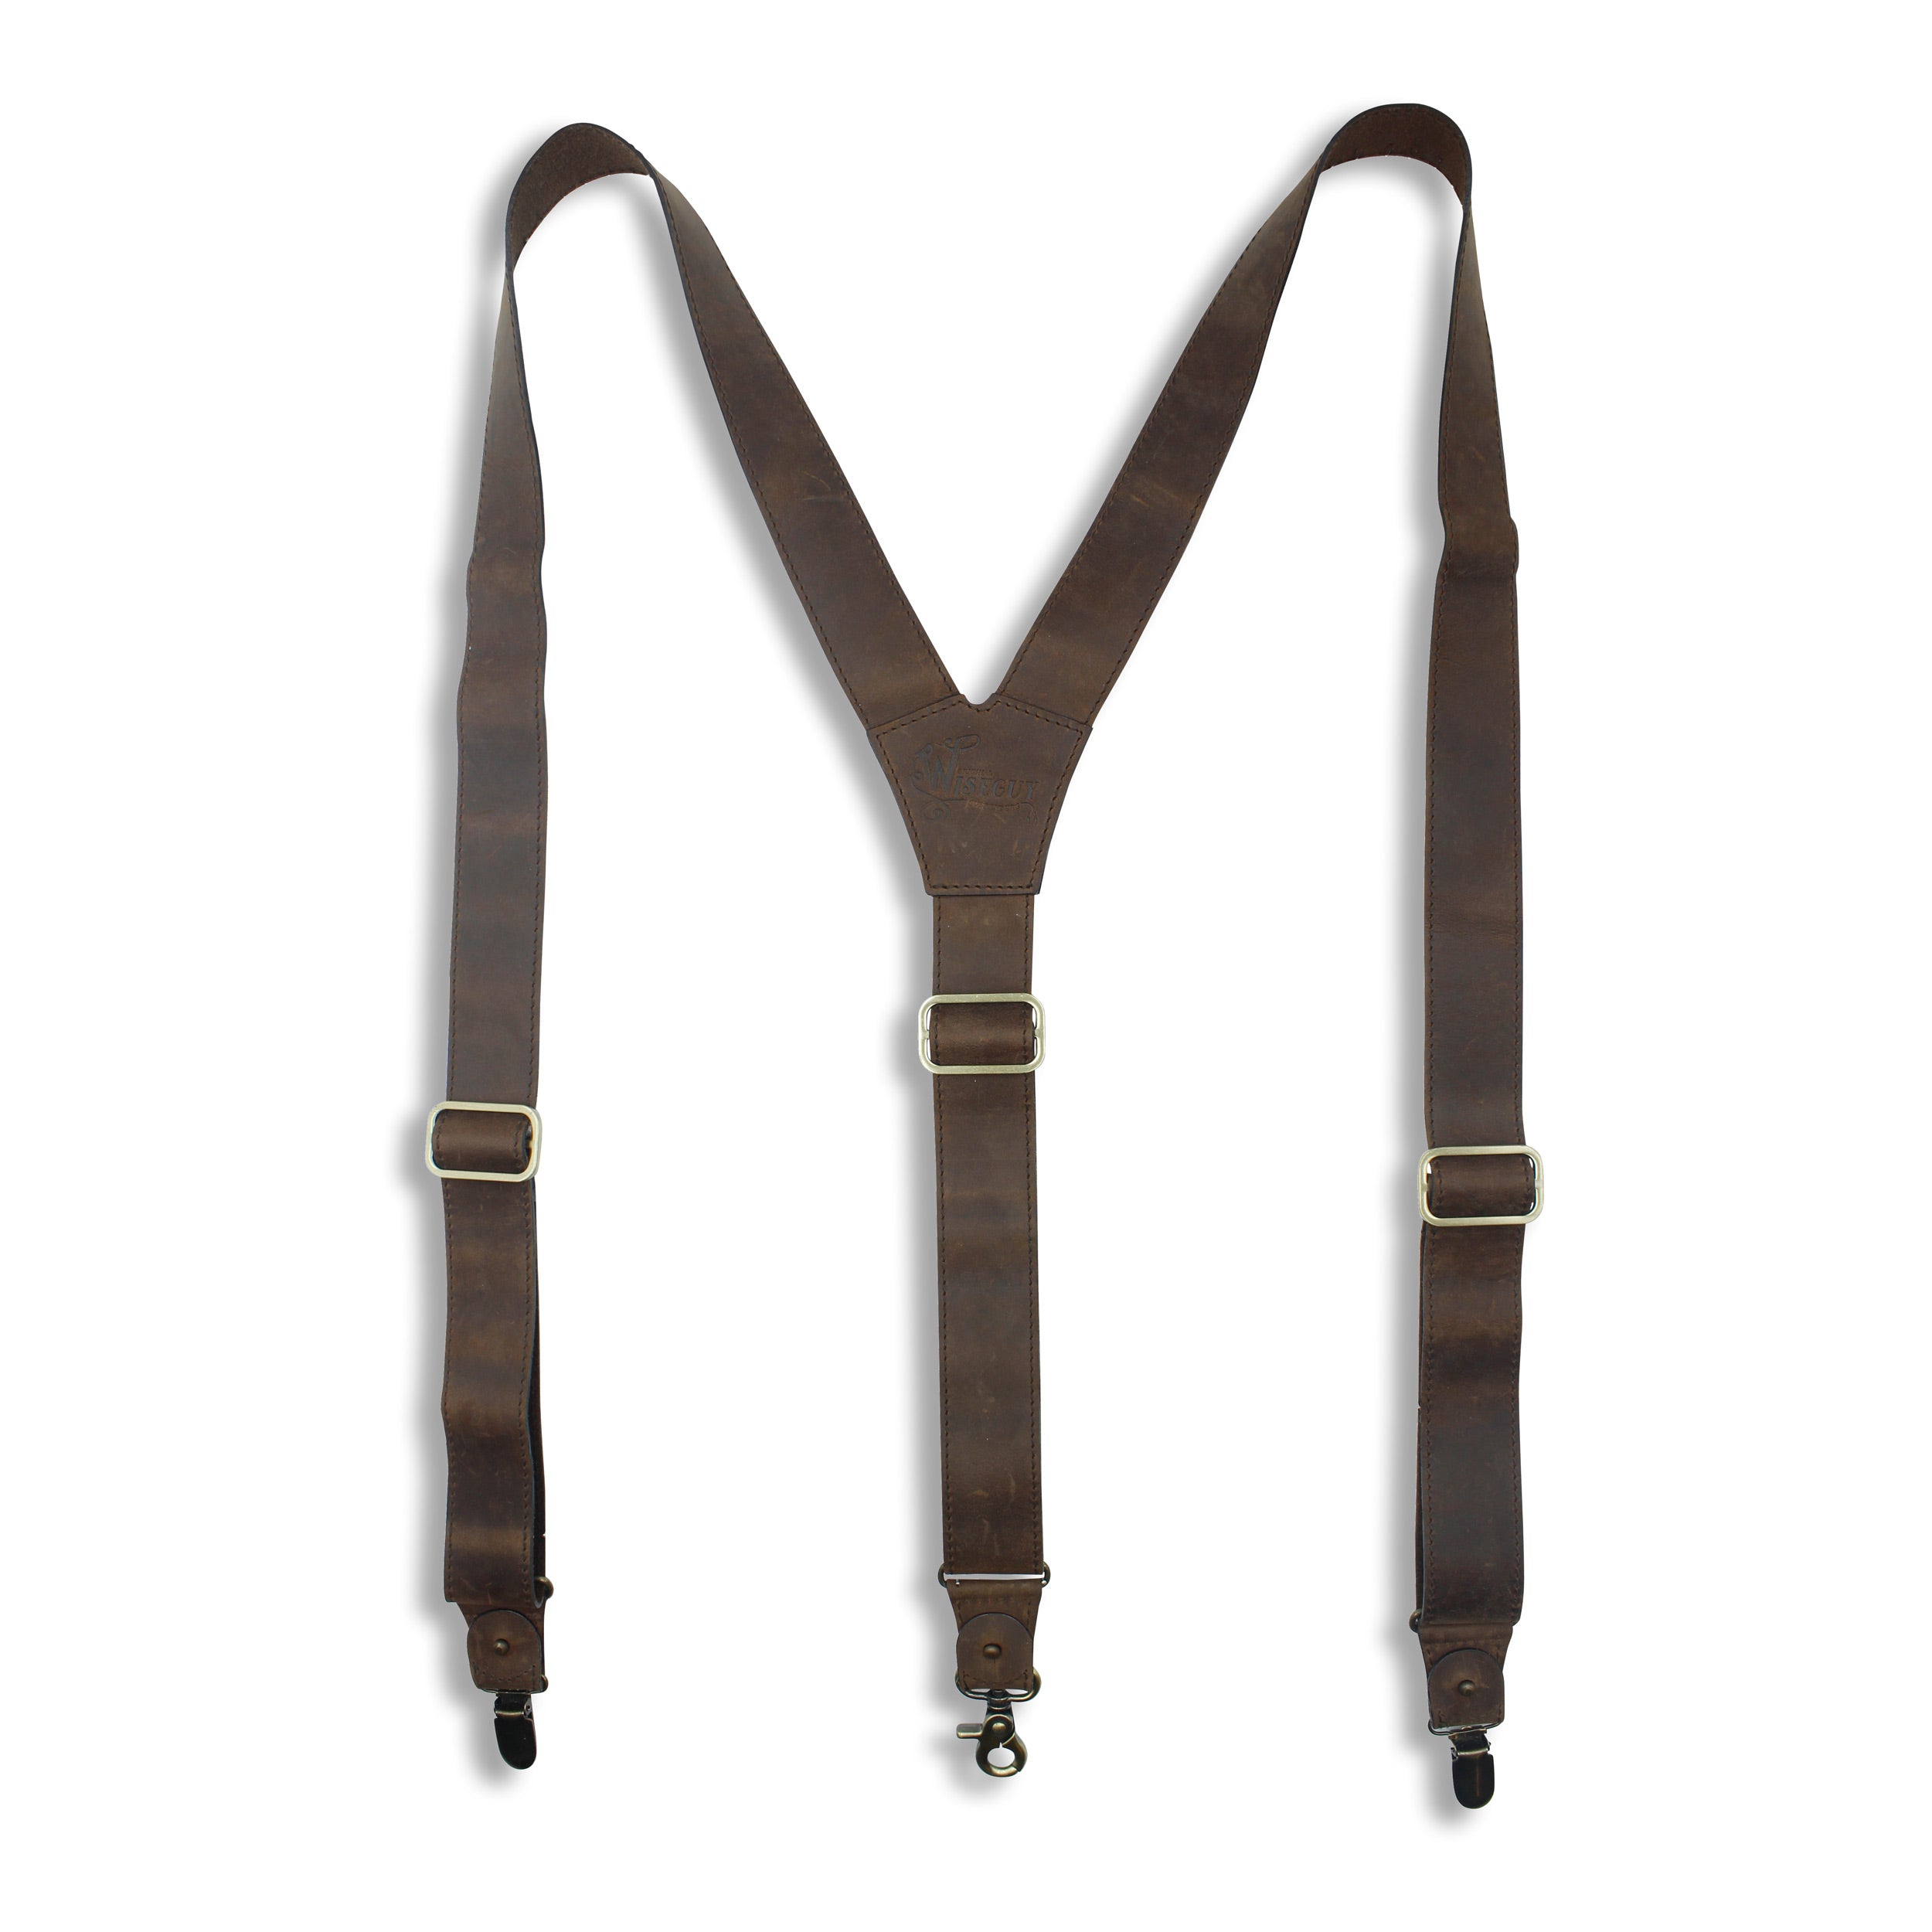 Brown Patterned Silk Suspenders for Buttons